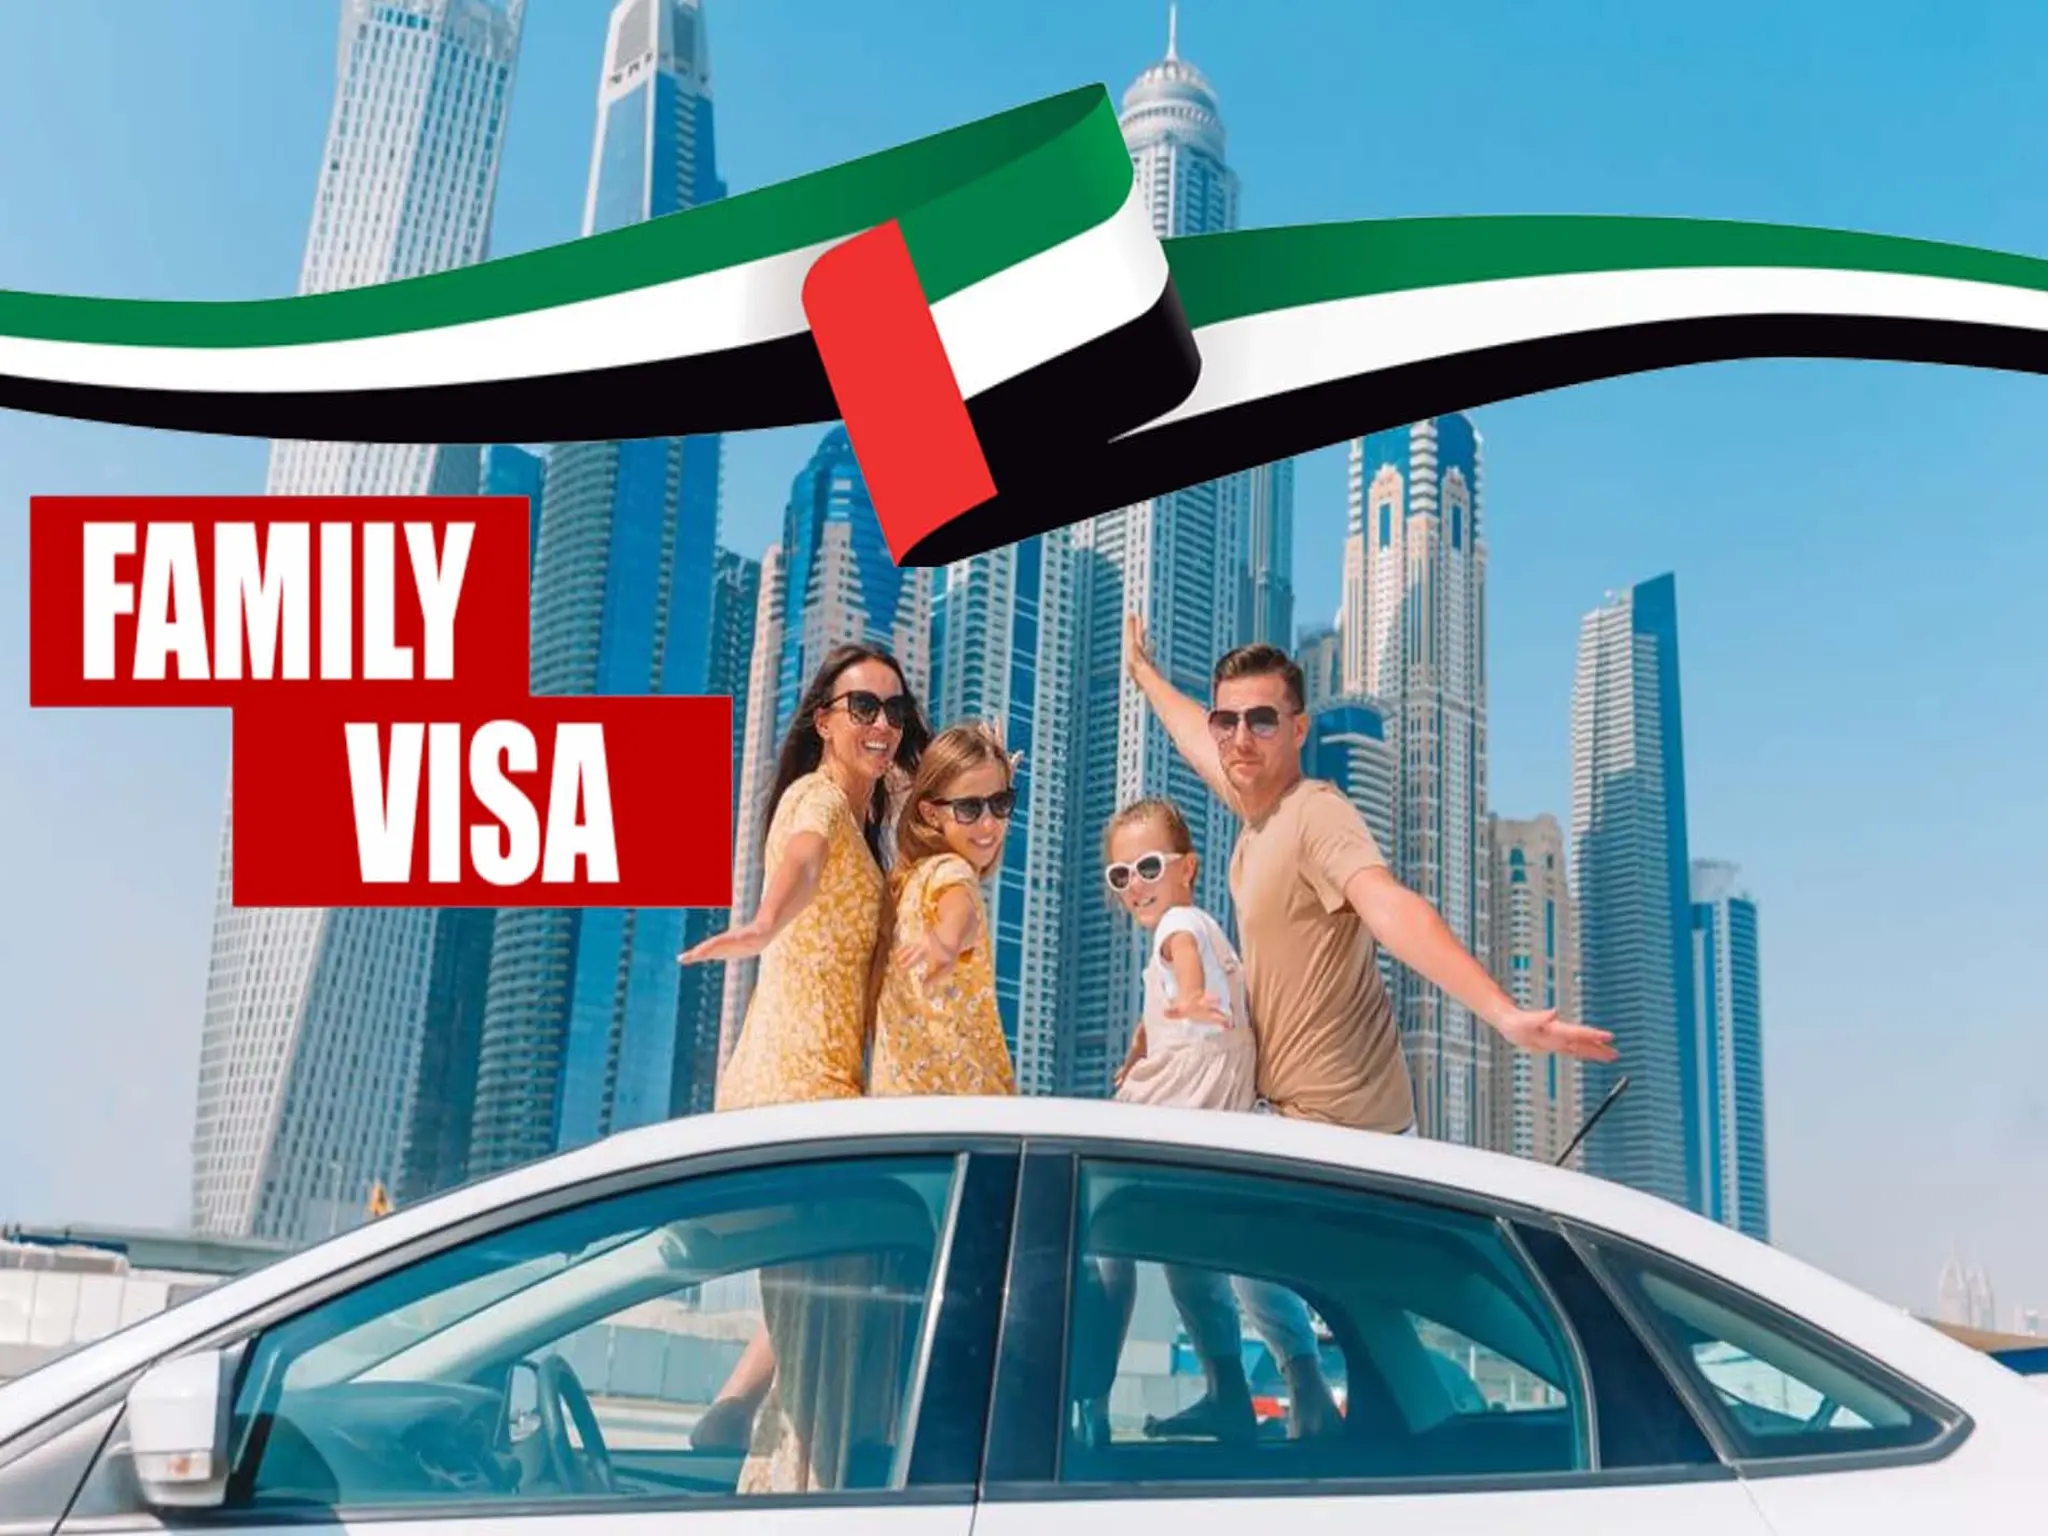 The UAE sets 9 basic requirements for residents to bring in their spouse and children